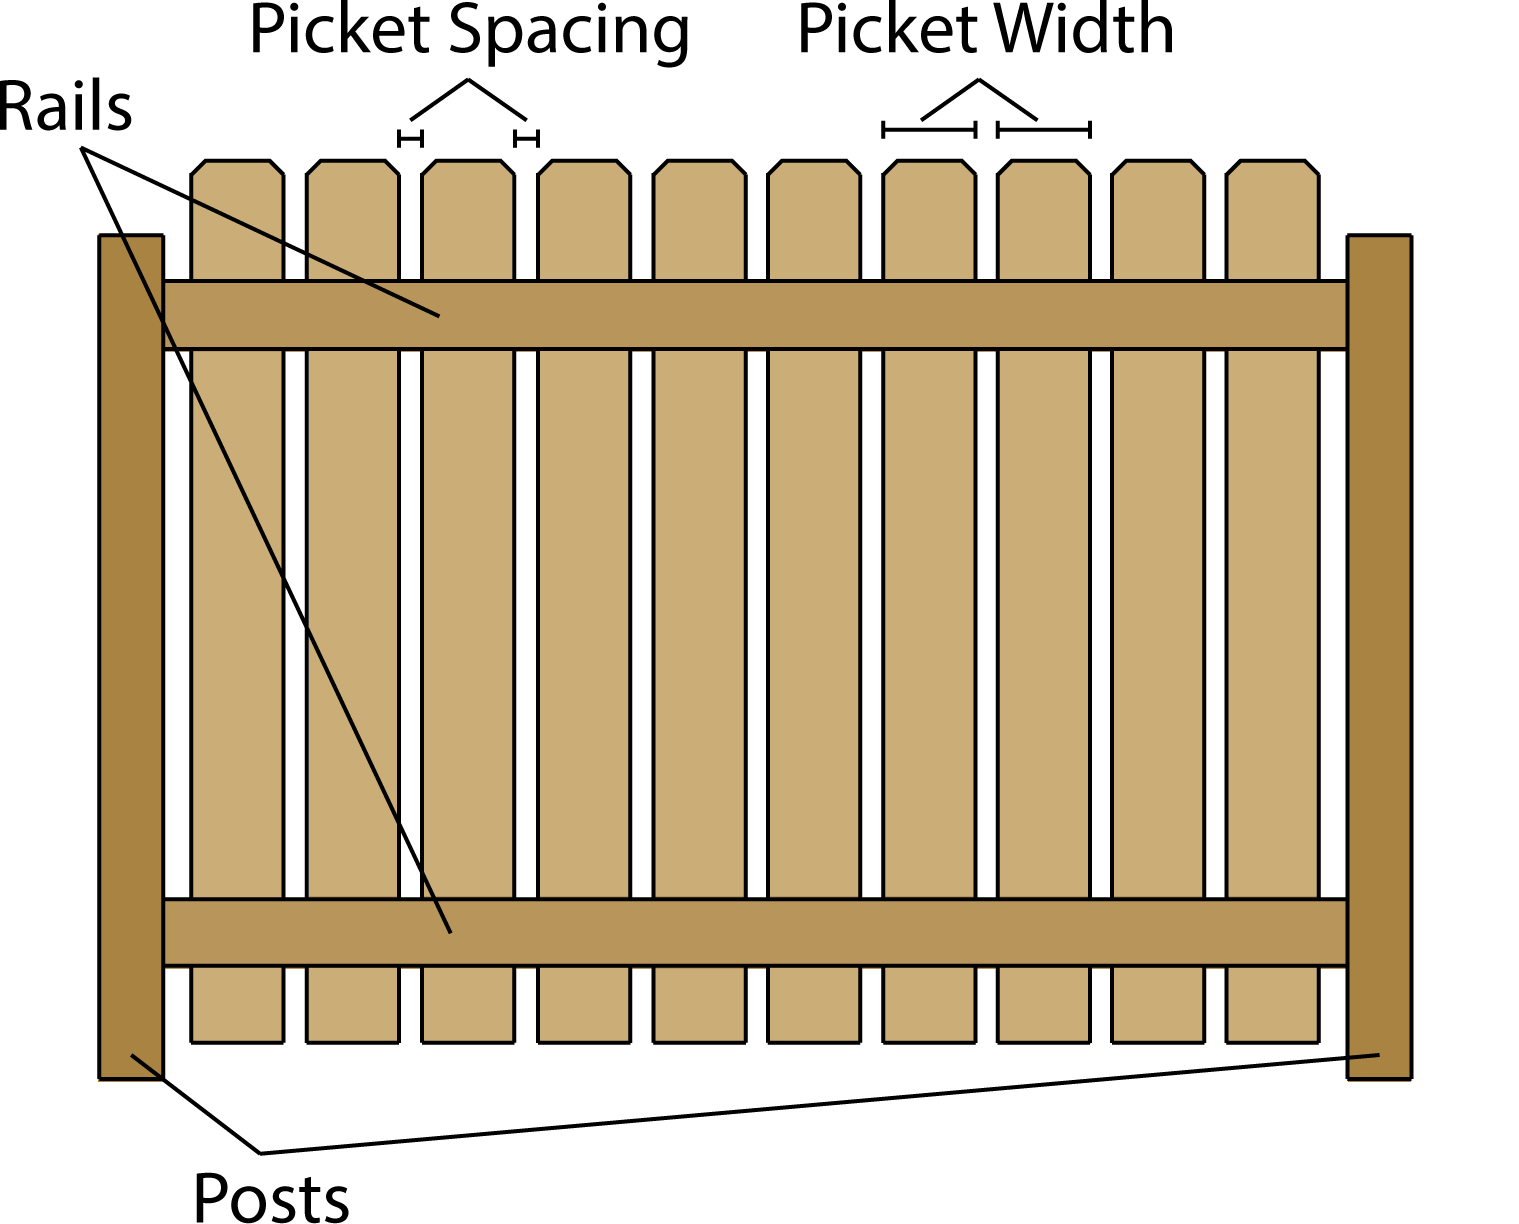 Estimate Wood Fencing Materials and Post Centers - Fence Calculator